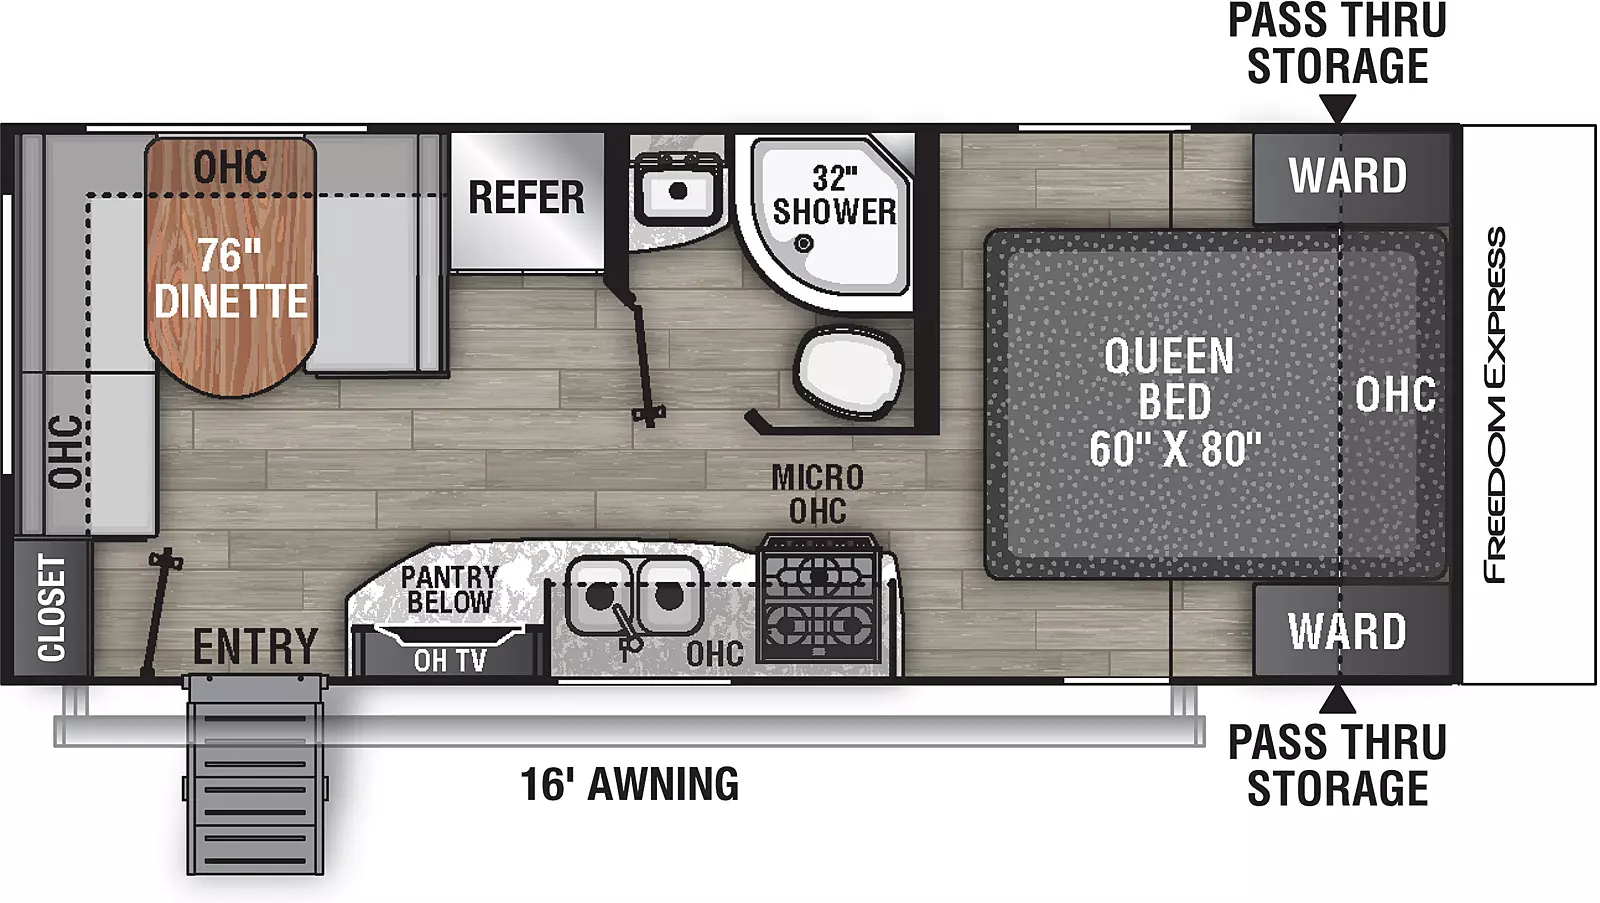 The 20SE has no slide outs and one entry door located on the door side. Interior layout from front to back: front bedroom with foot facing queen bed, side aisle bathroom on the off-door side, kitchen living dining area with the stove, double basin sink, TV and pantry below on the door side, refrigerator and dinette located on the off-door side, closet is located at the rear.